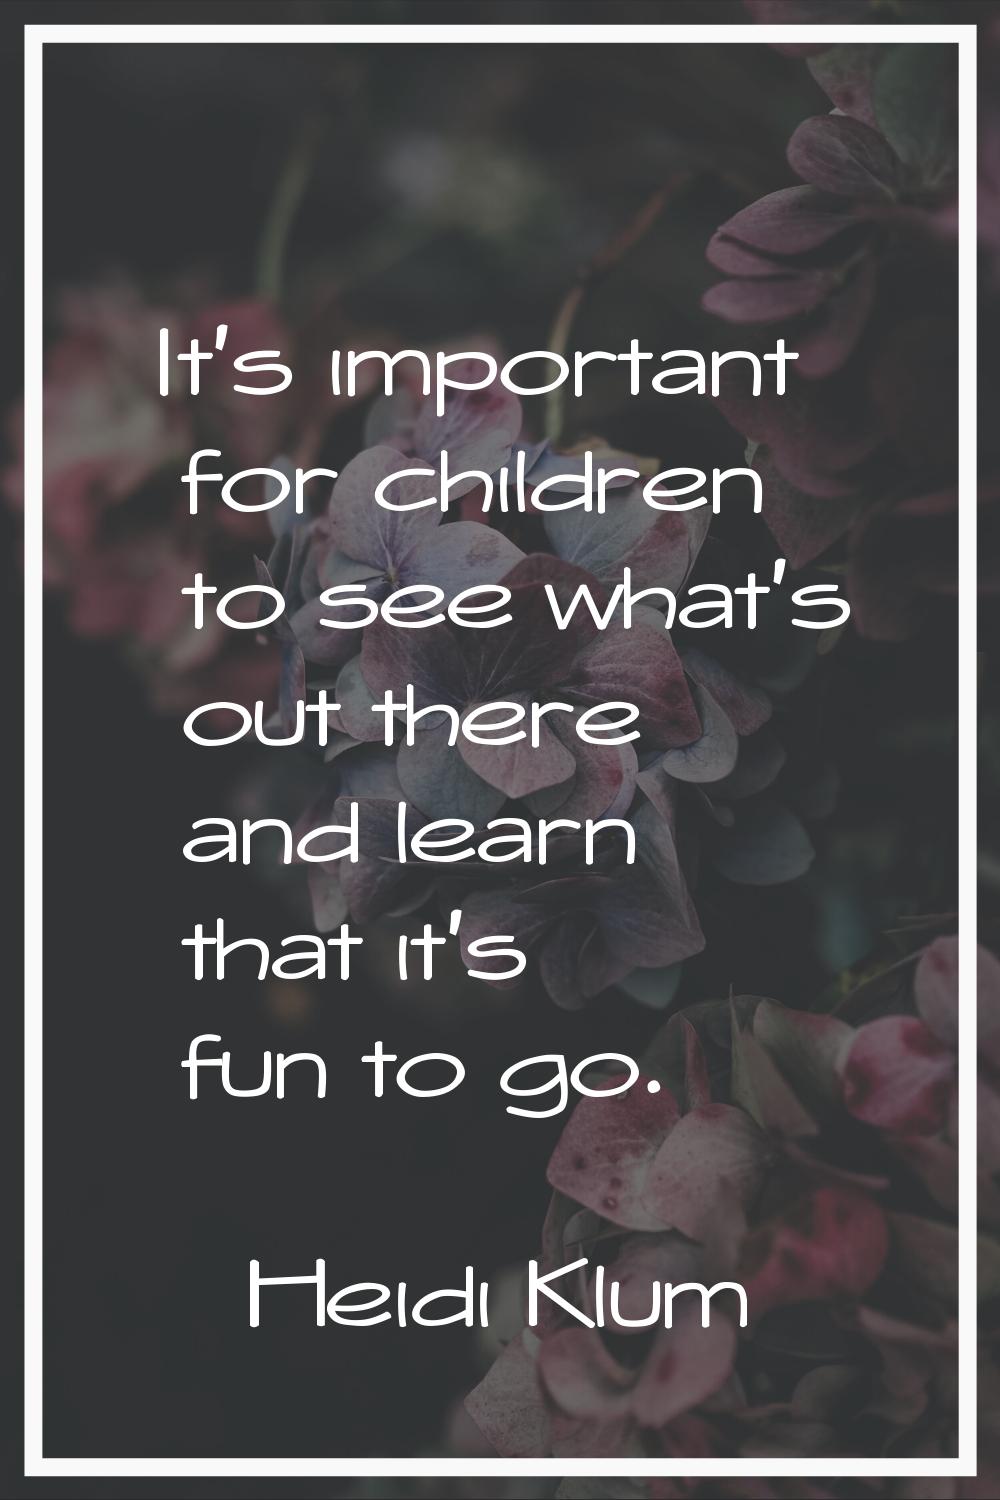 It's important for children to see what's out there and learn that it's fun to go.